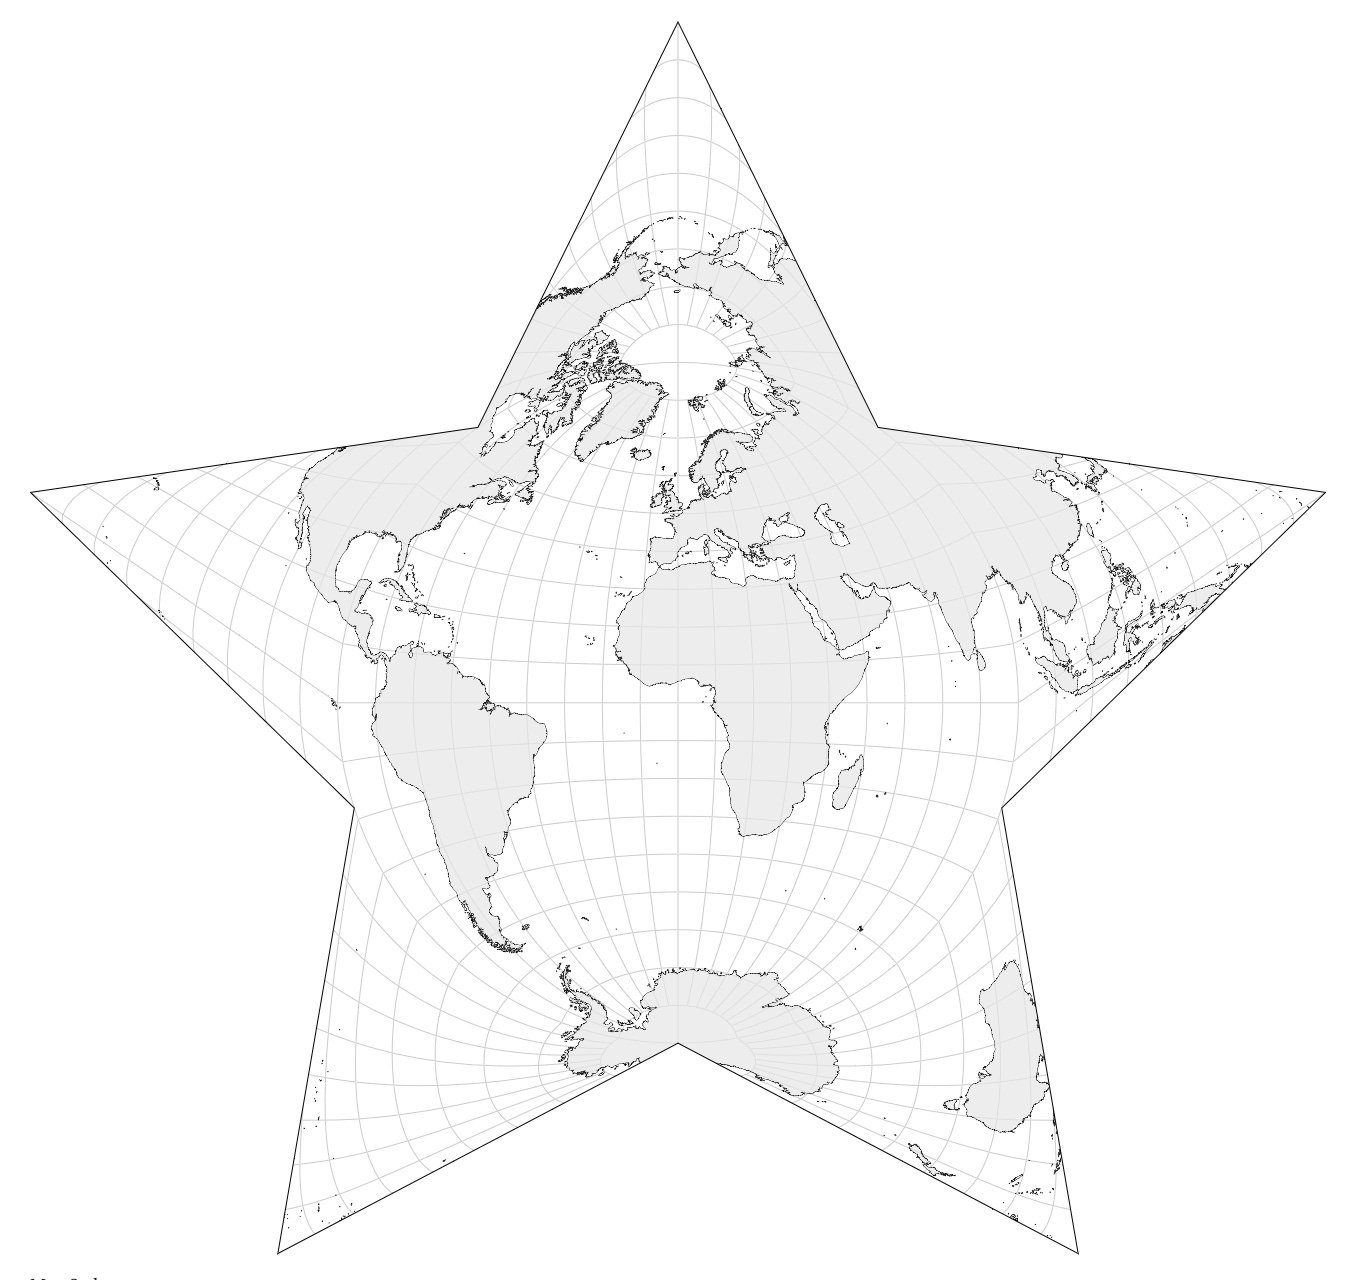 Berghaus' star projection